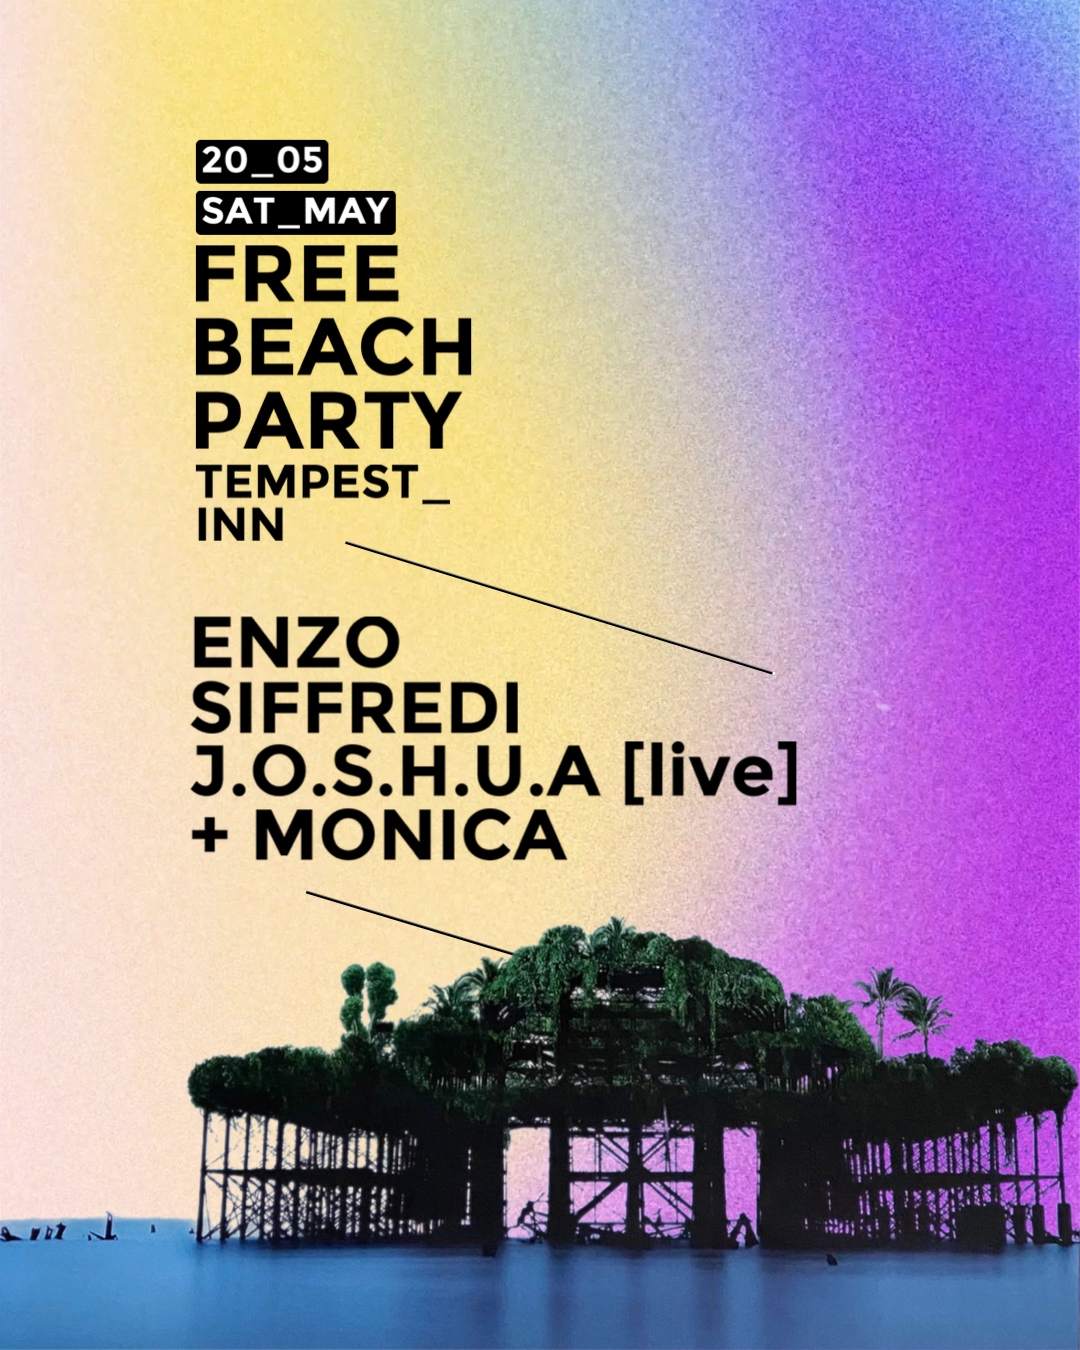 Free Beach Party with Enzo Siffredi - フライヤー表